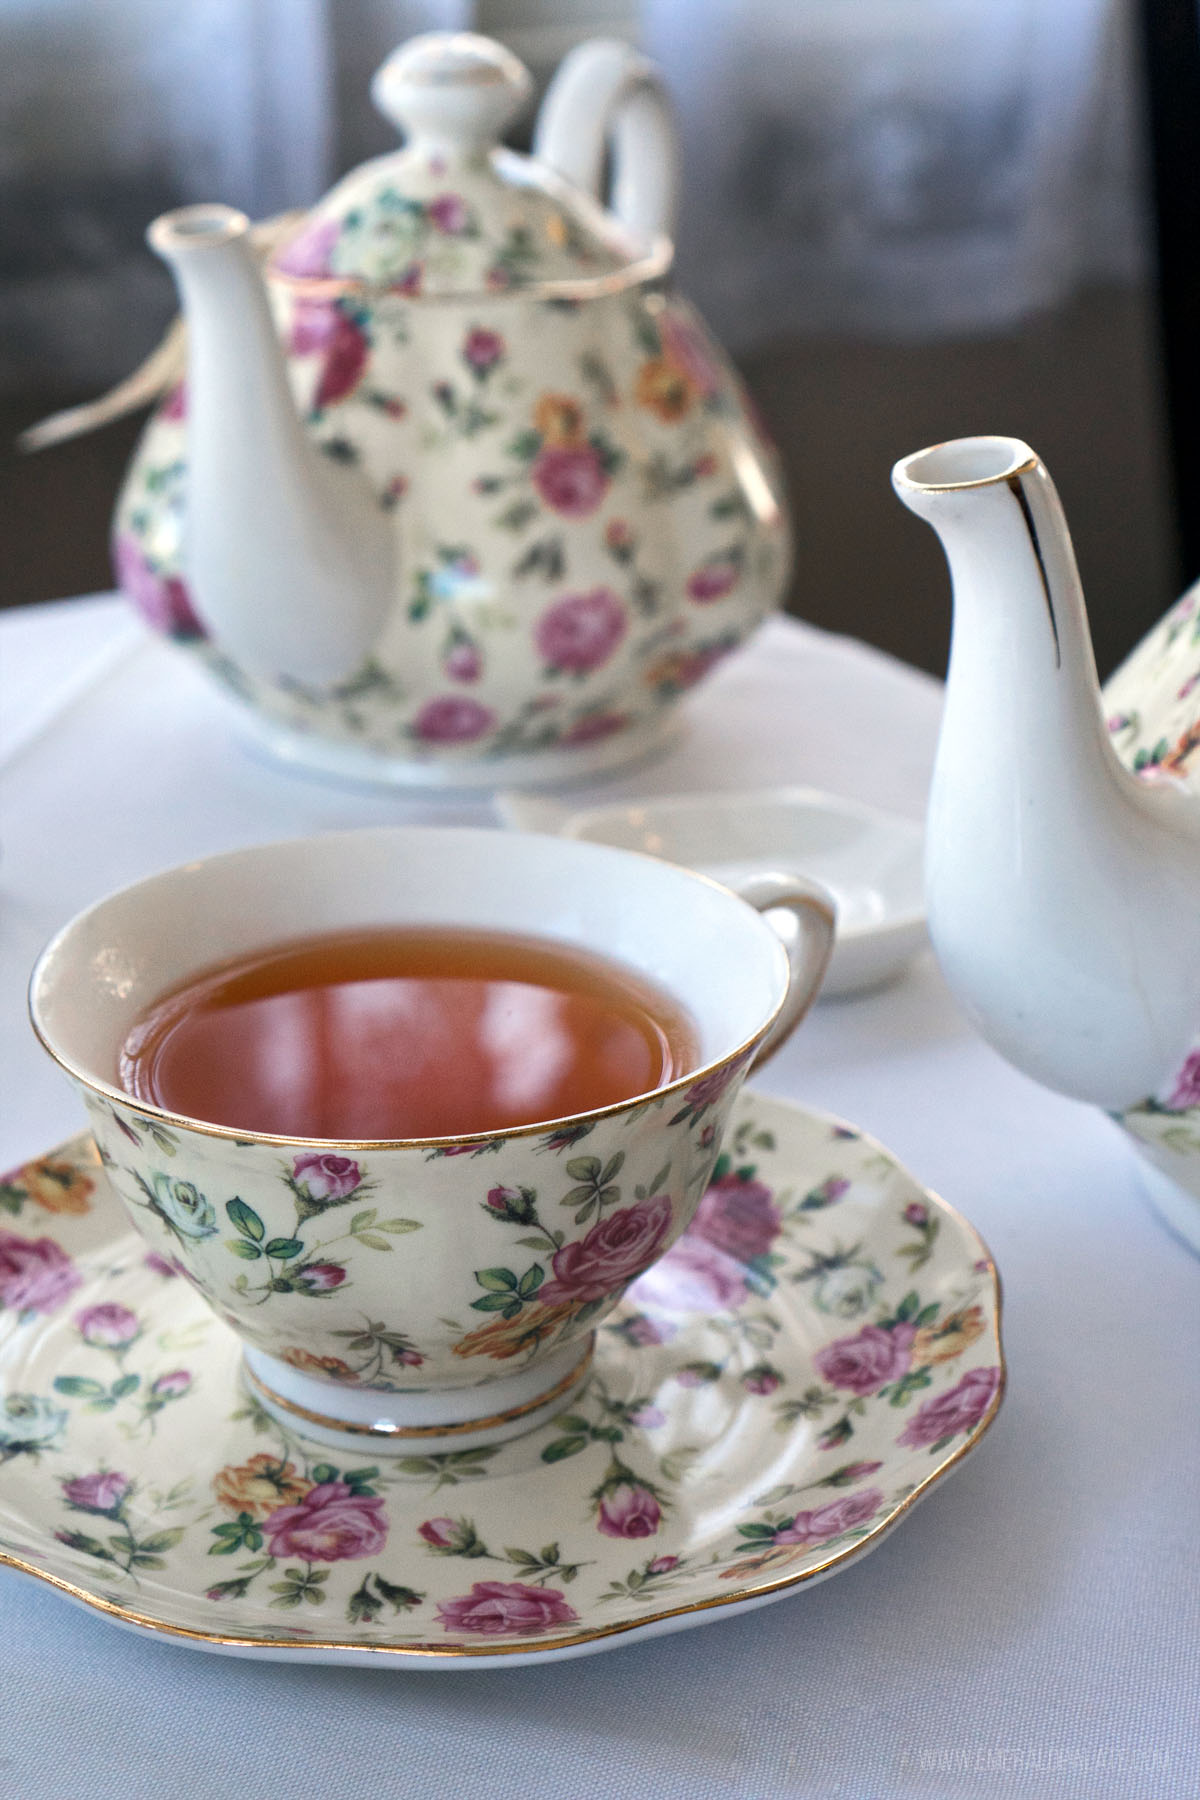 Fine china tea cups and pot from afternoon tea spot in Victoria, British Columbia